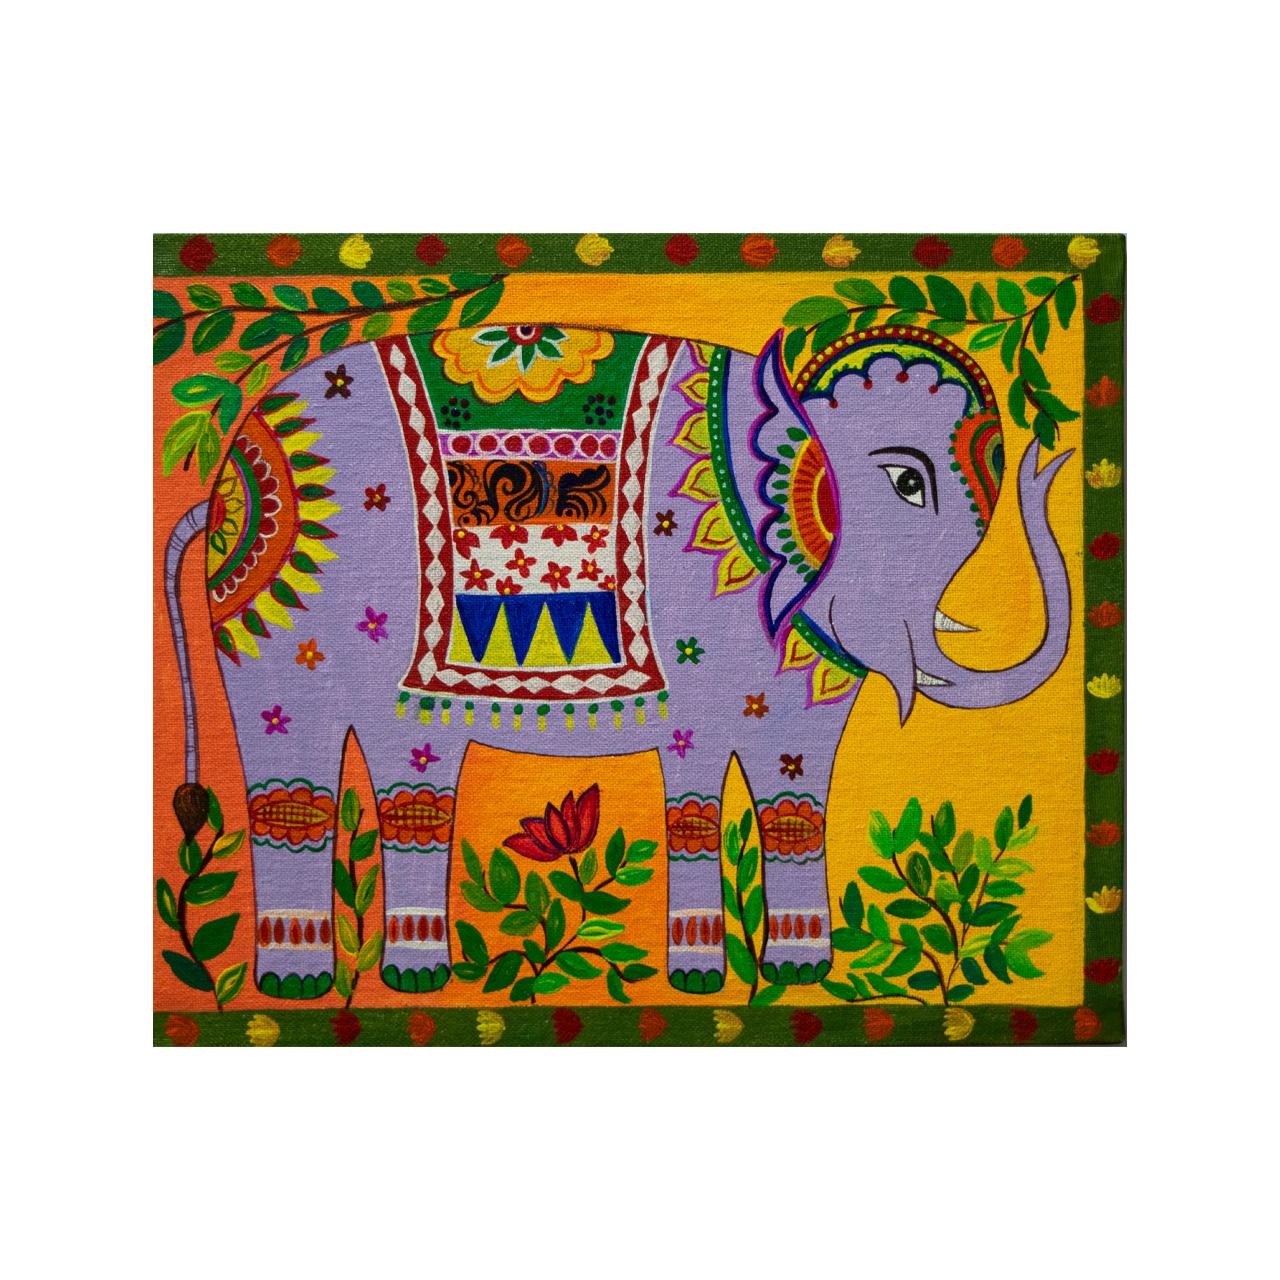 MADHUBANI STYLE 03 (DECORATED ELEPHANTS)  (~40% OFF LIST PRICE - LIMITED TIME) - Painting by Jay Patel